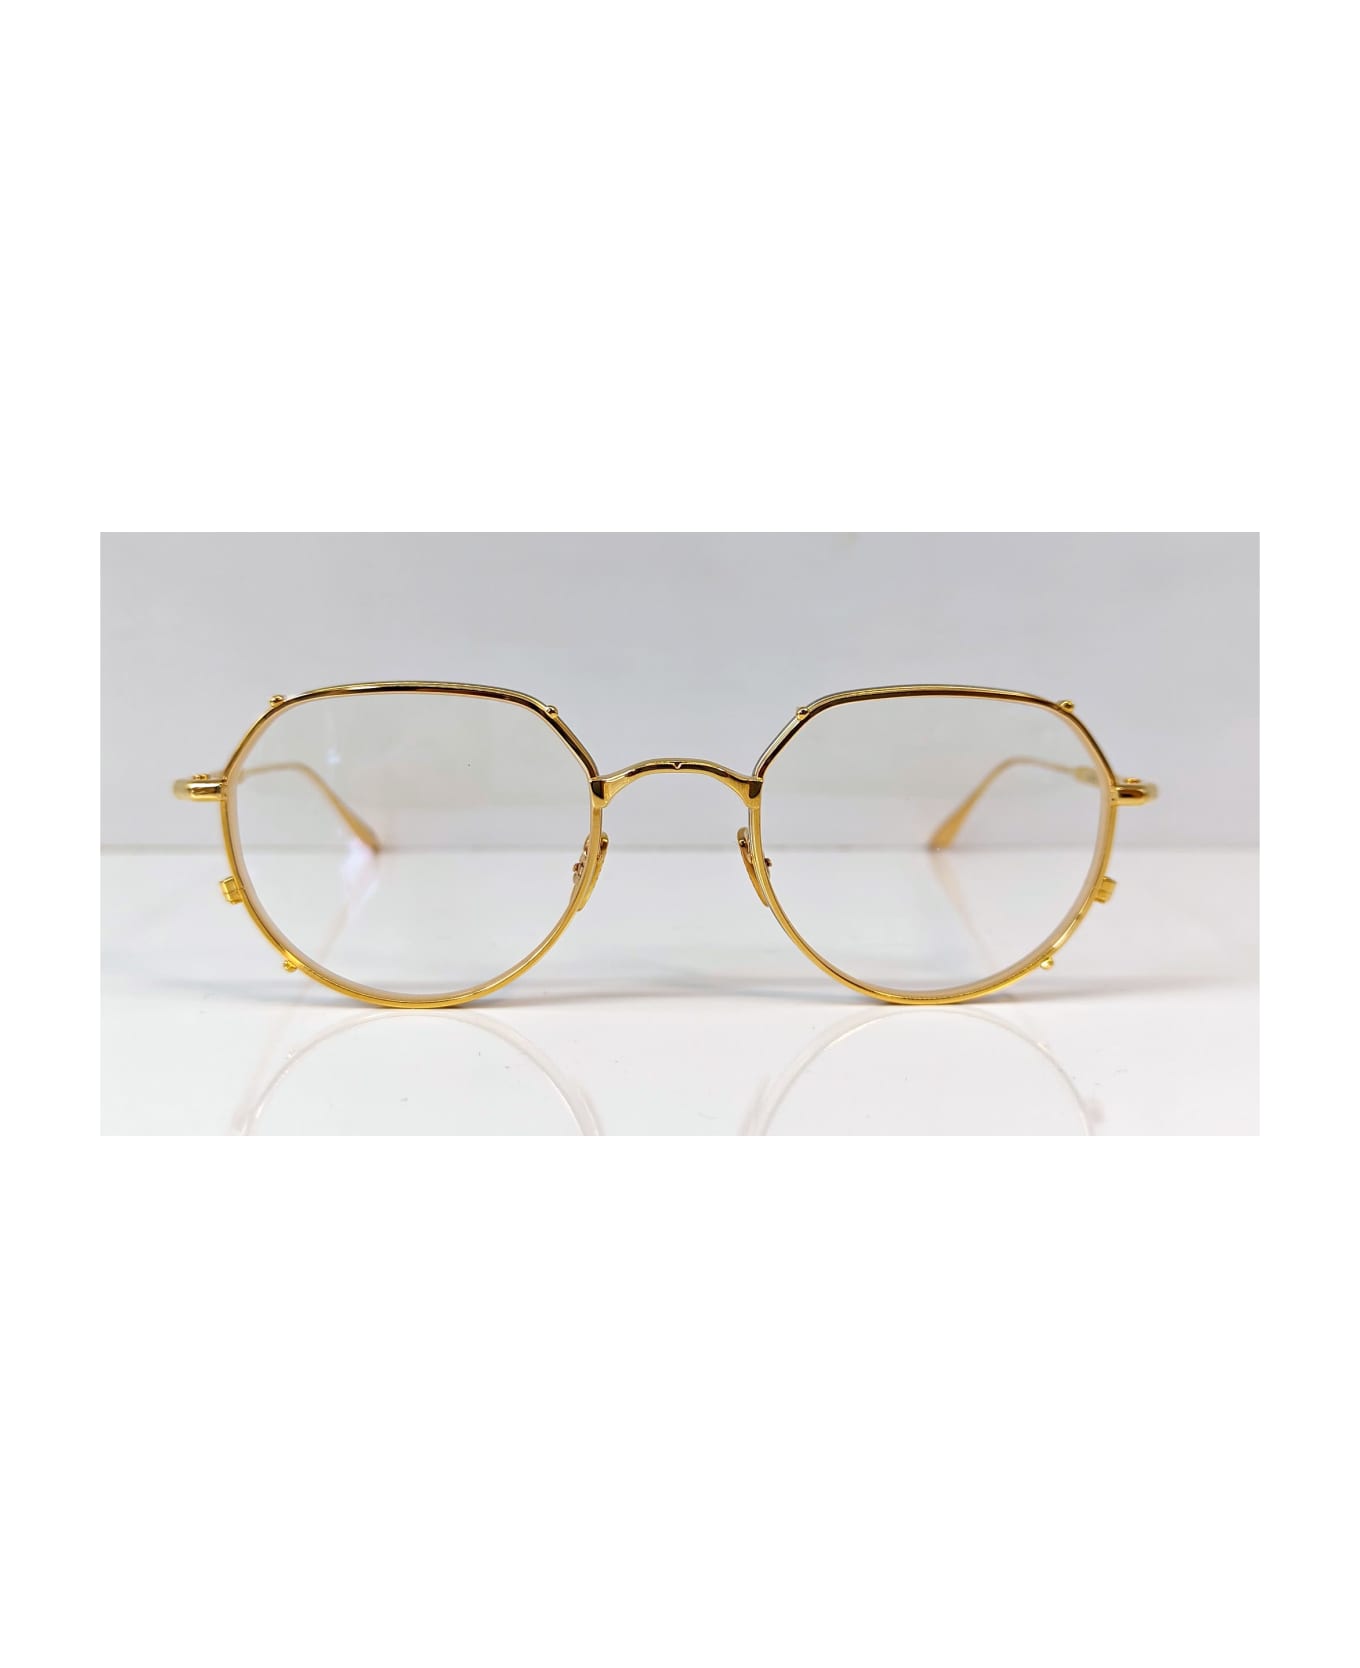 Jacques Marie Mage Hartana - Gold 2 Rx Glasses - gold/silver